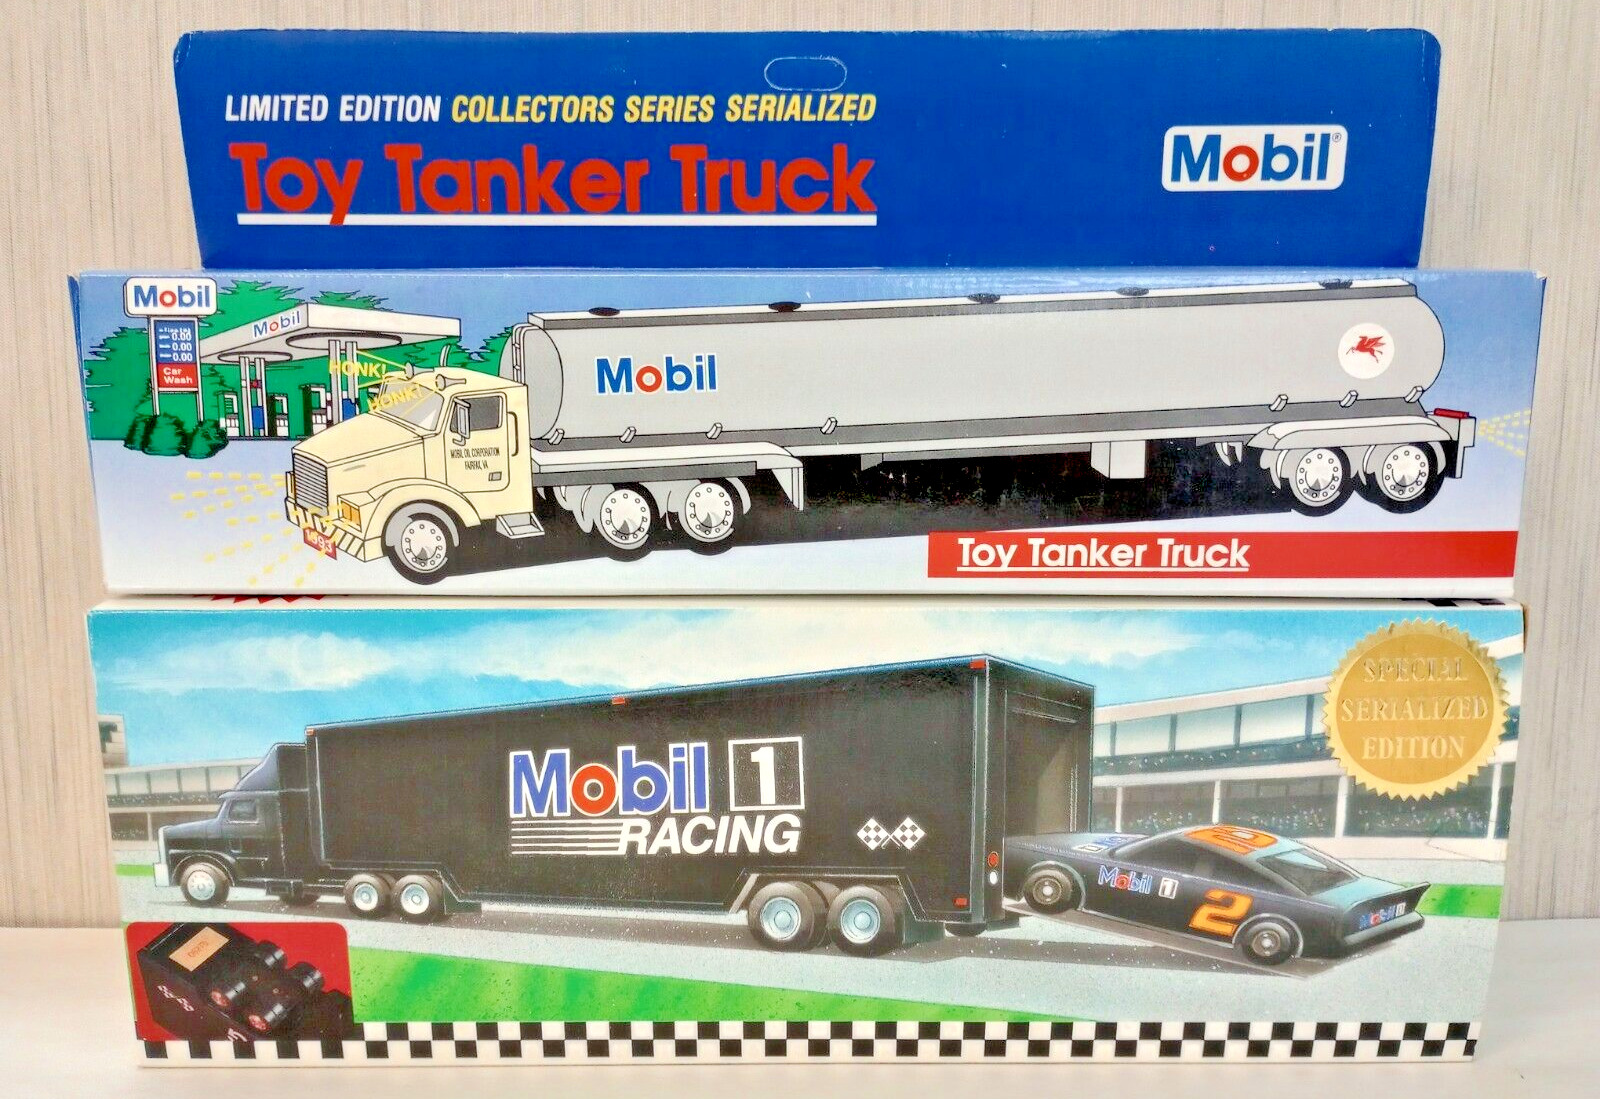 1994 MOBIL 1 RACING RACE CAR CARRIER (SERIALIZED EDITION) 1993 TOY TANKER TRUCK